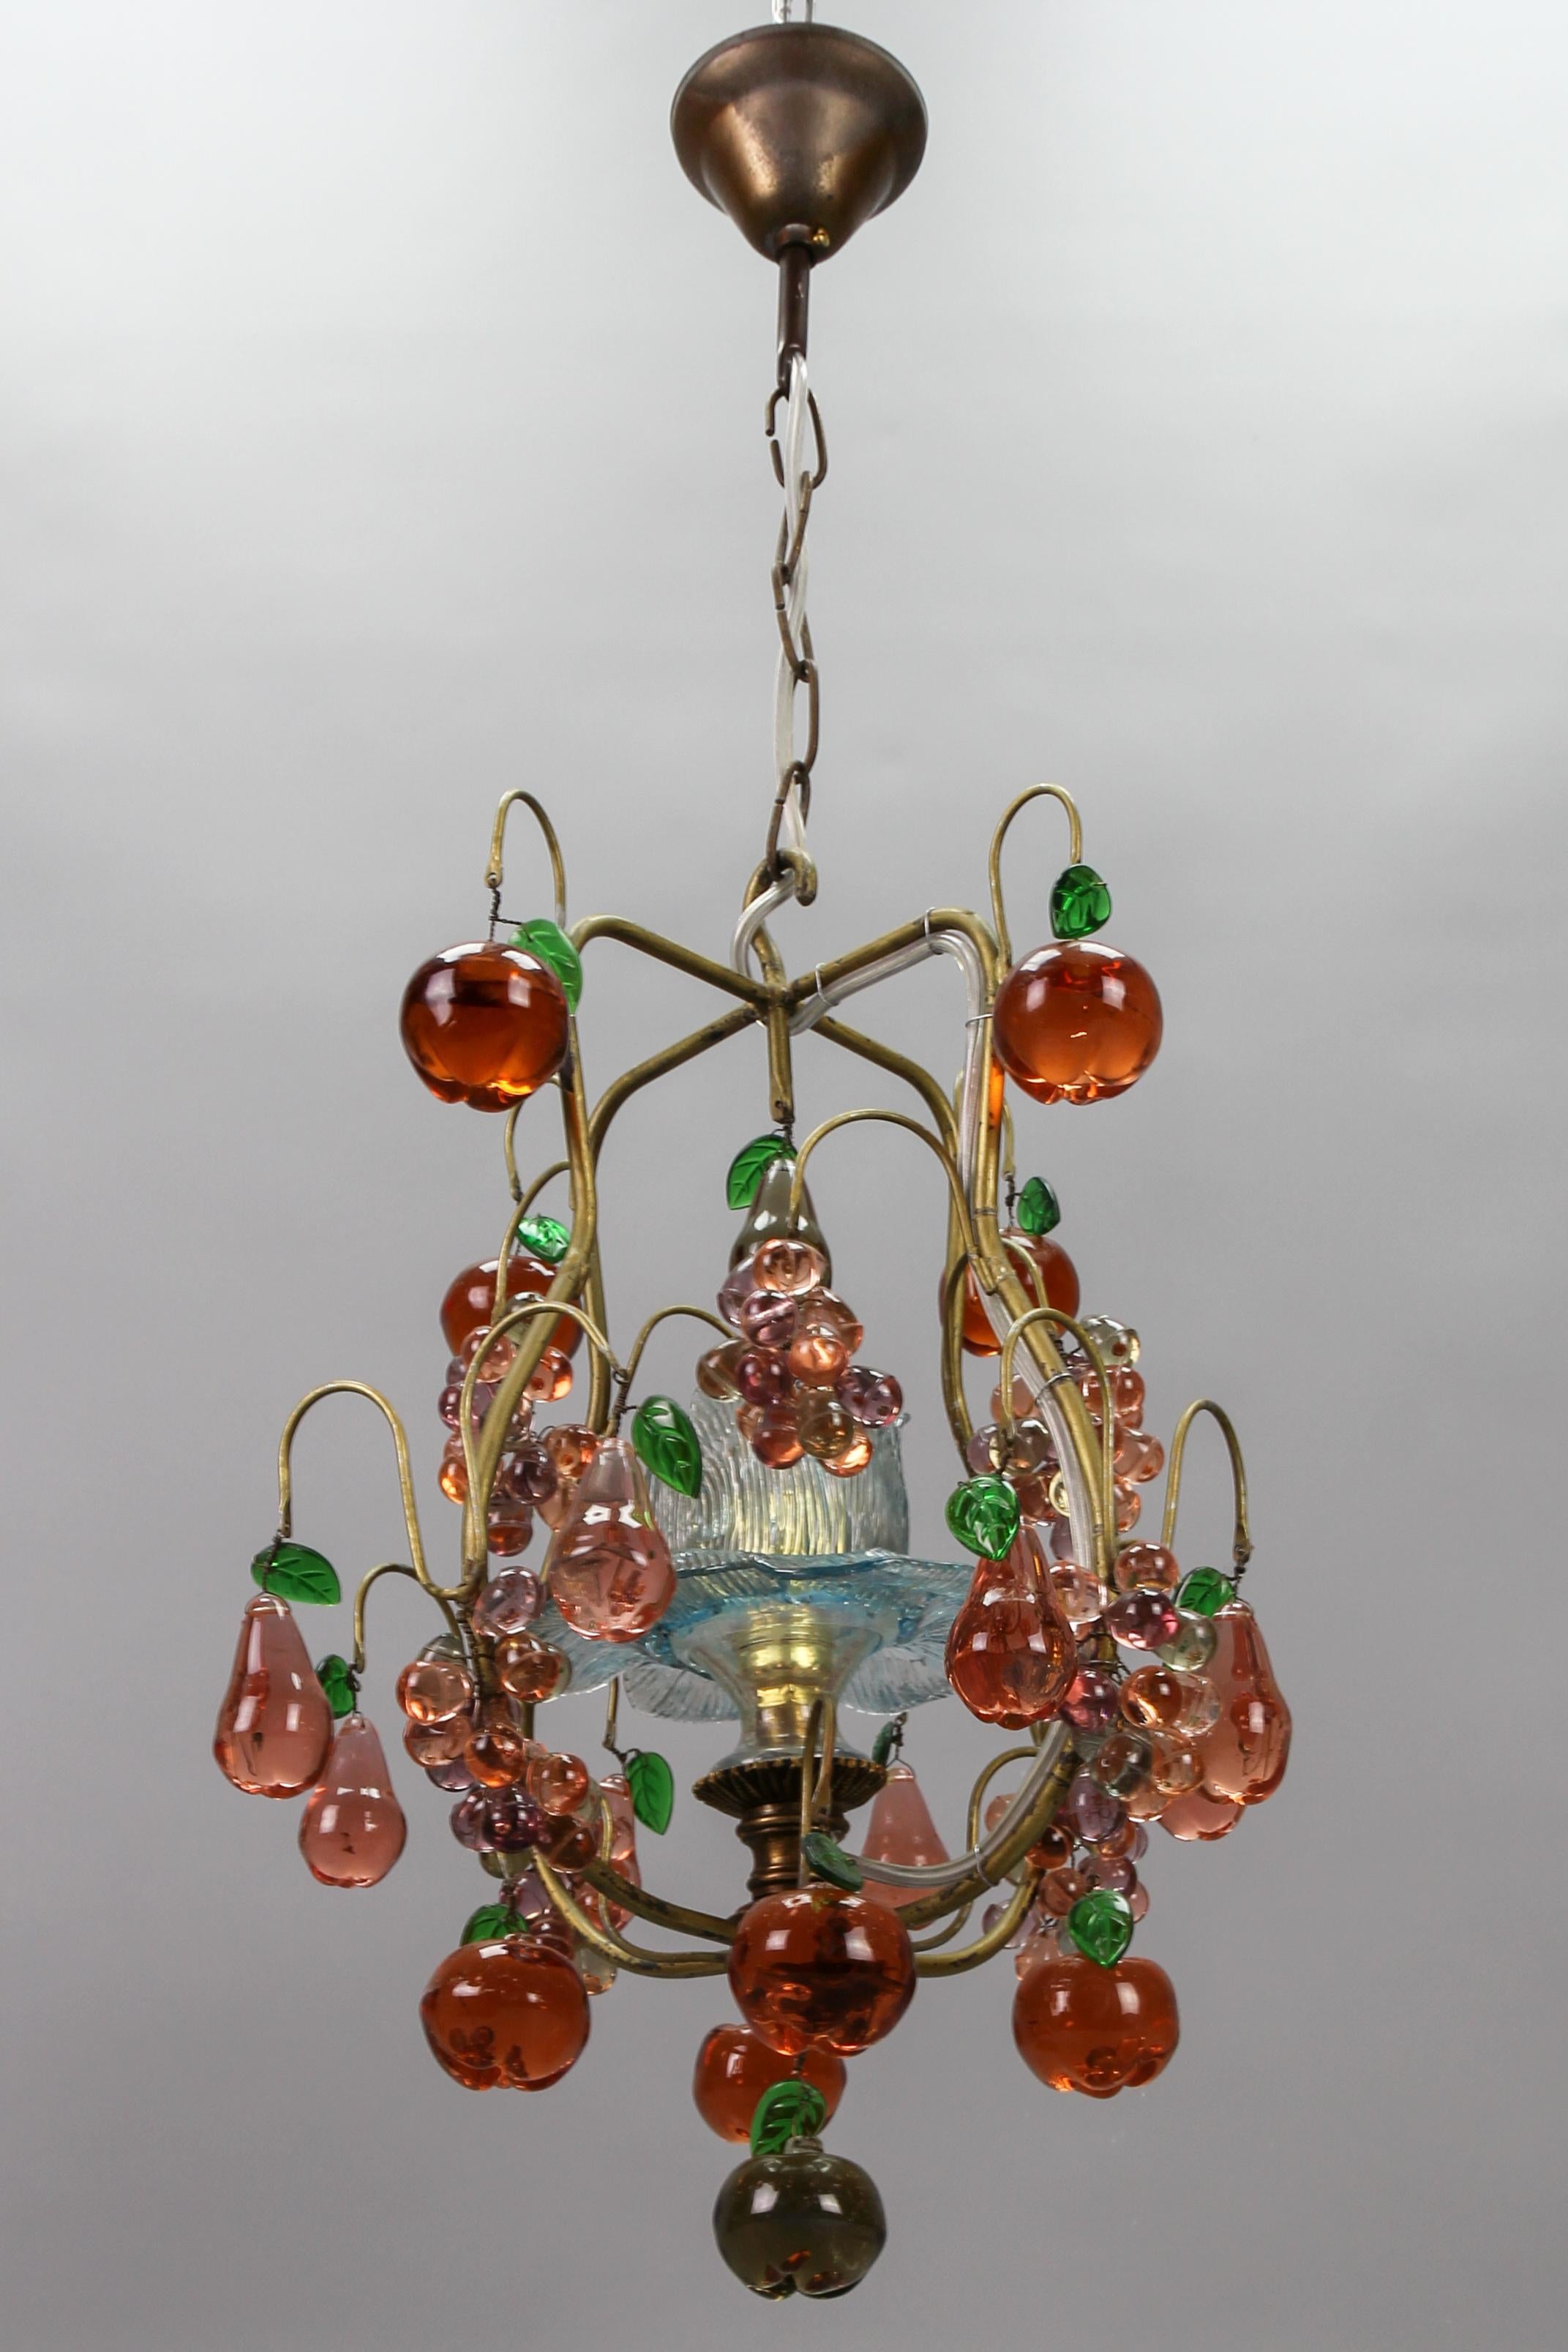 Italian Venetian single-light pendant chandelier with multicolored Murano glass fruits and berries from the circa 1950s.
This adorable and compact size Italian Hollywood Regency-style pendant chandelier features a golden-colored metal frame adorned